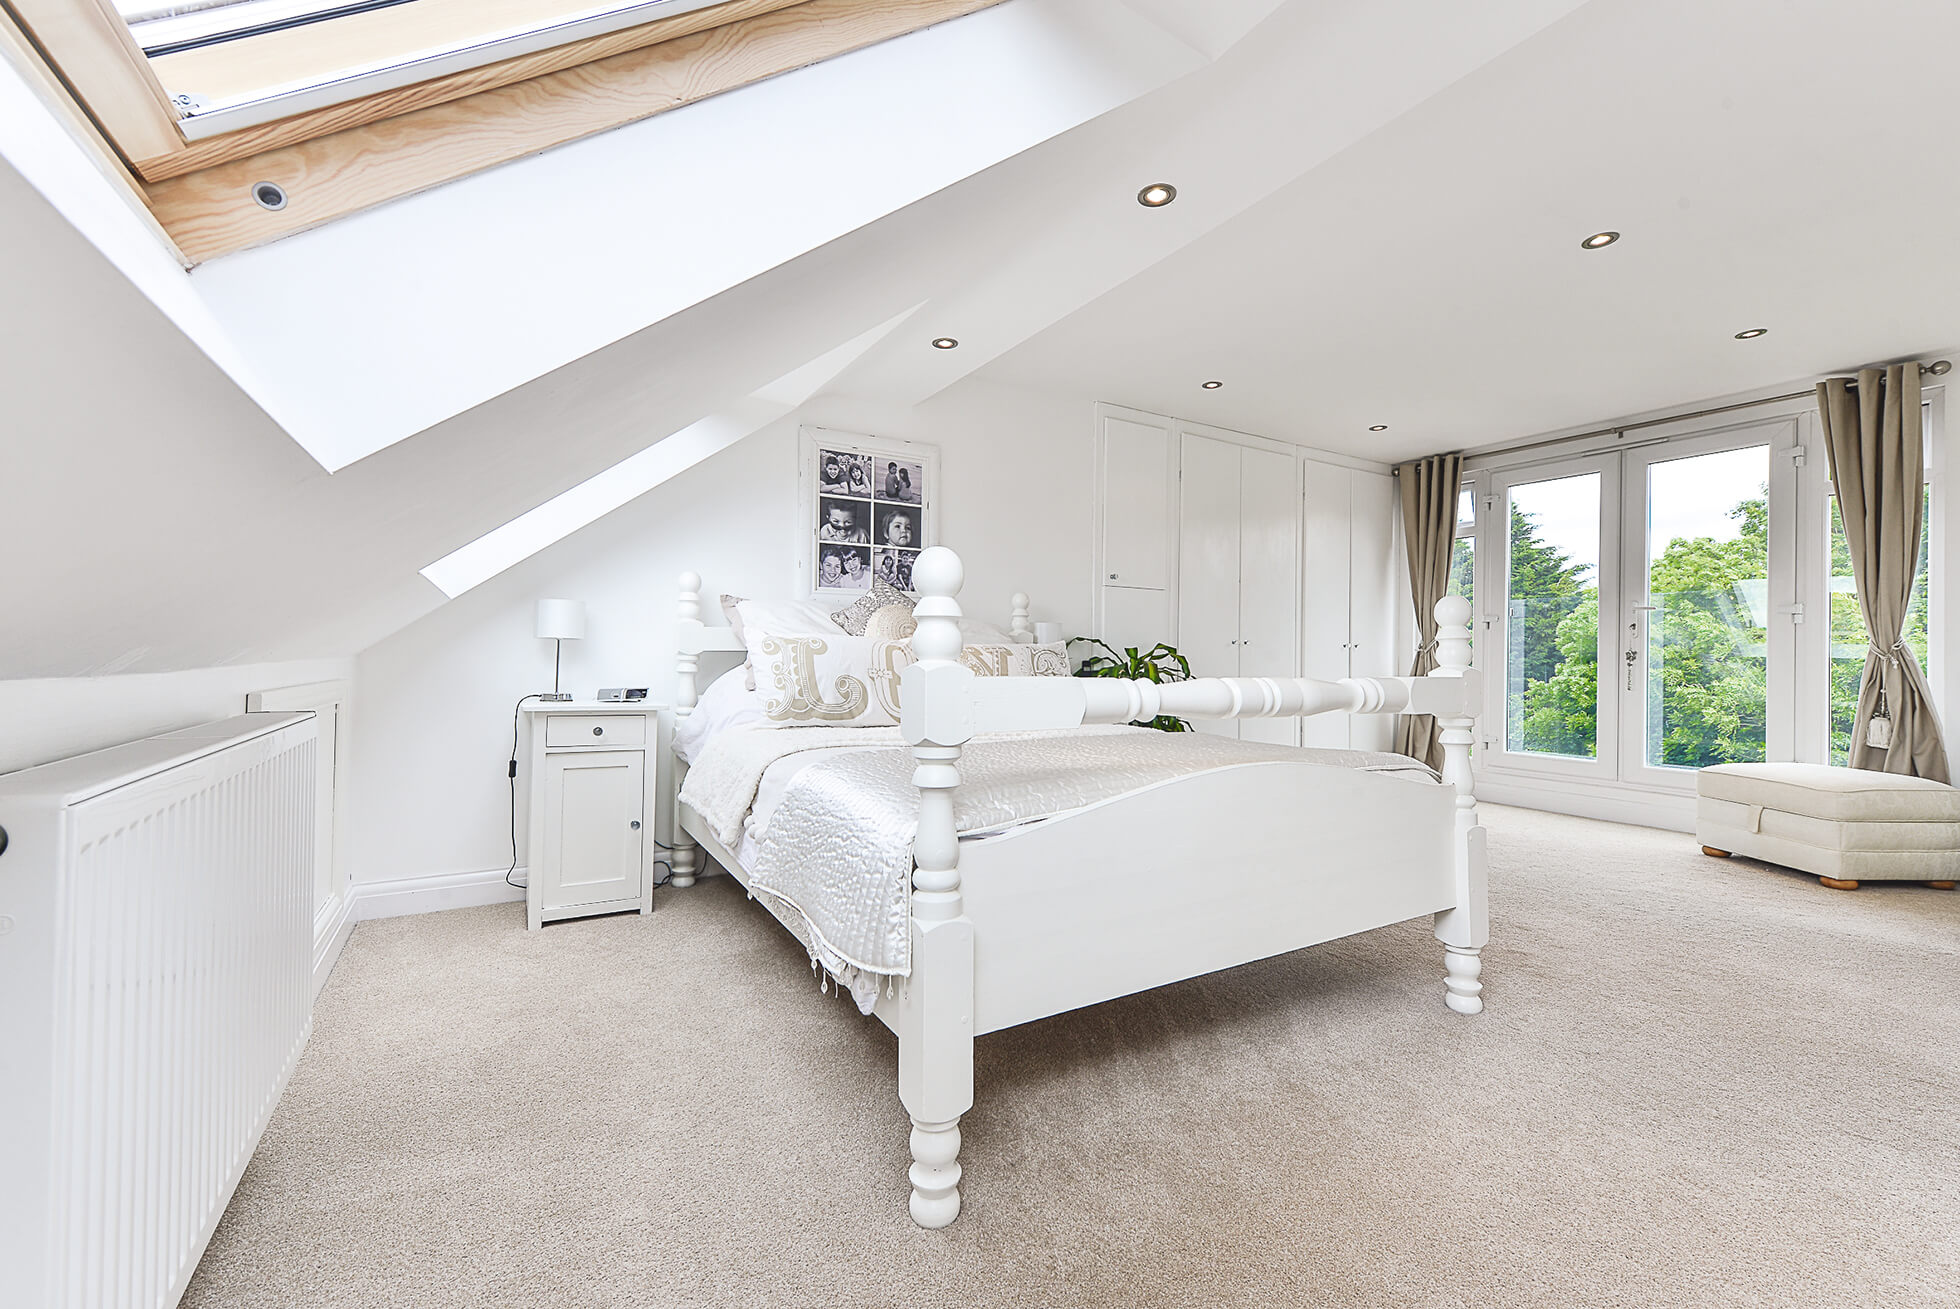 Do you have a question about converting your Loft in Hertford? Here are the most popular questions asked by our clients.